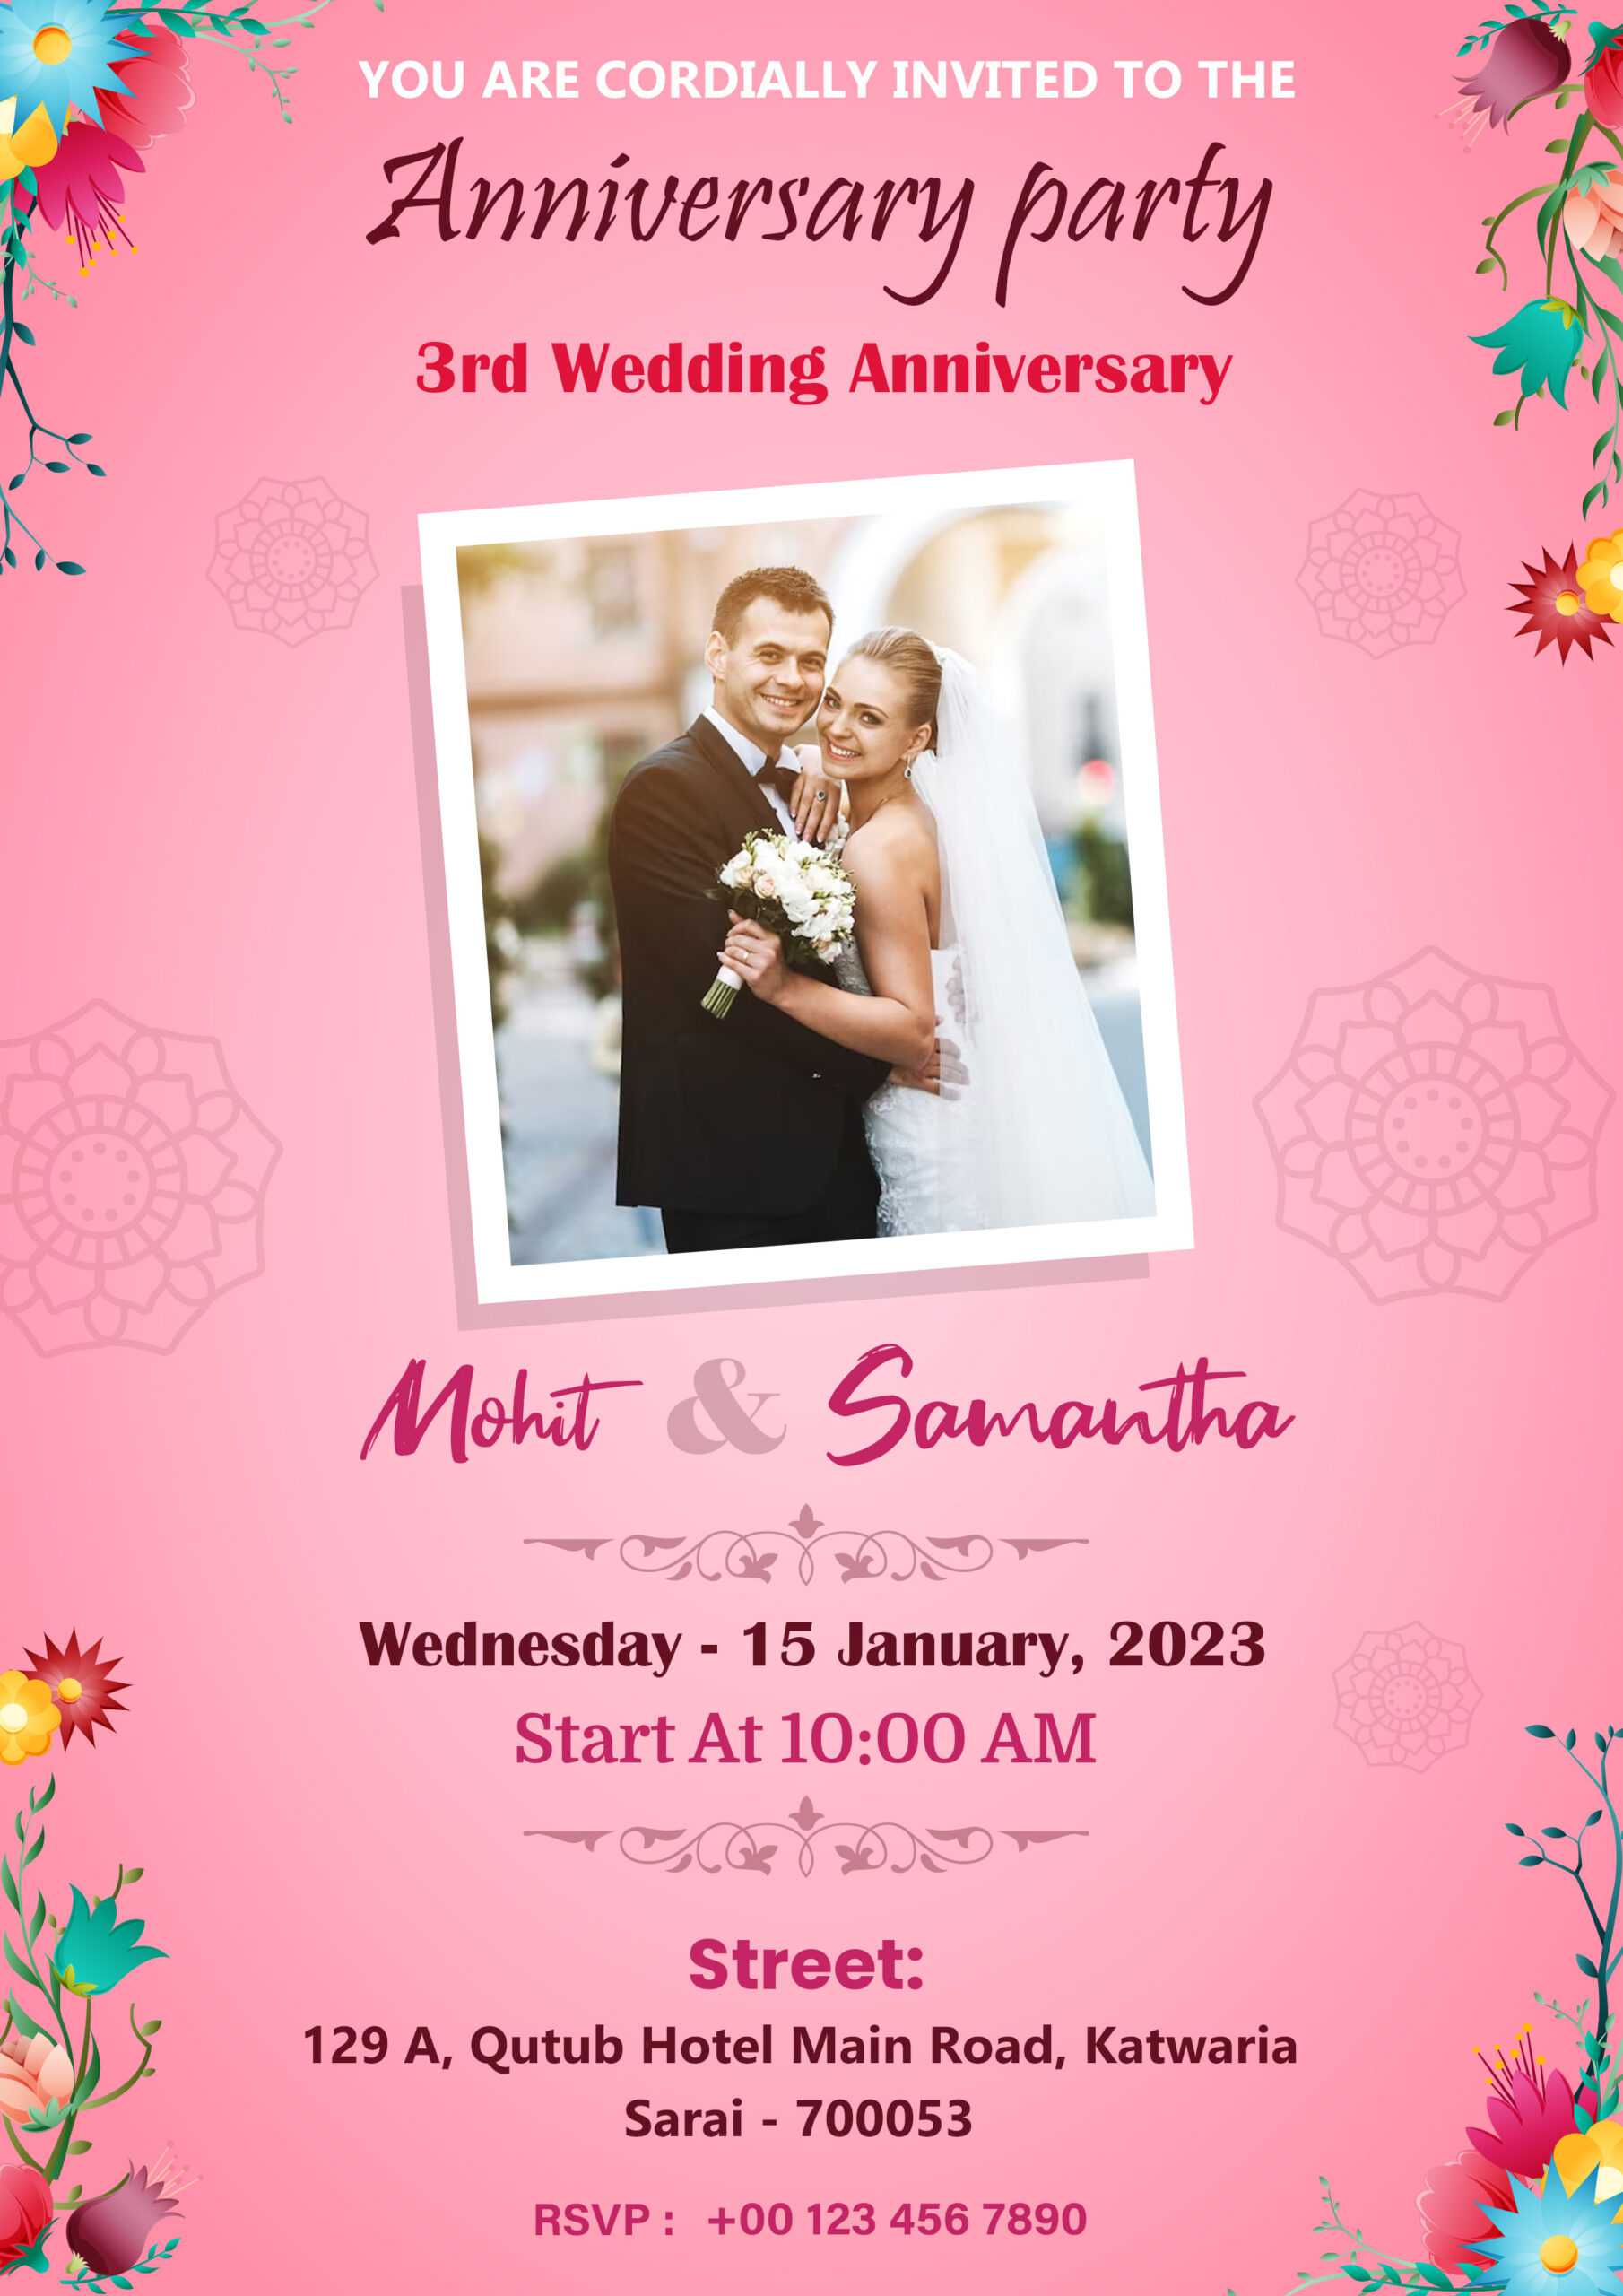 Best Anniversary Invitation Card Format: Make Your Card Stand Out